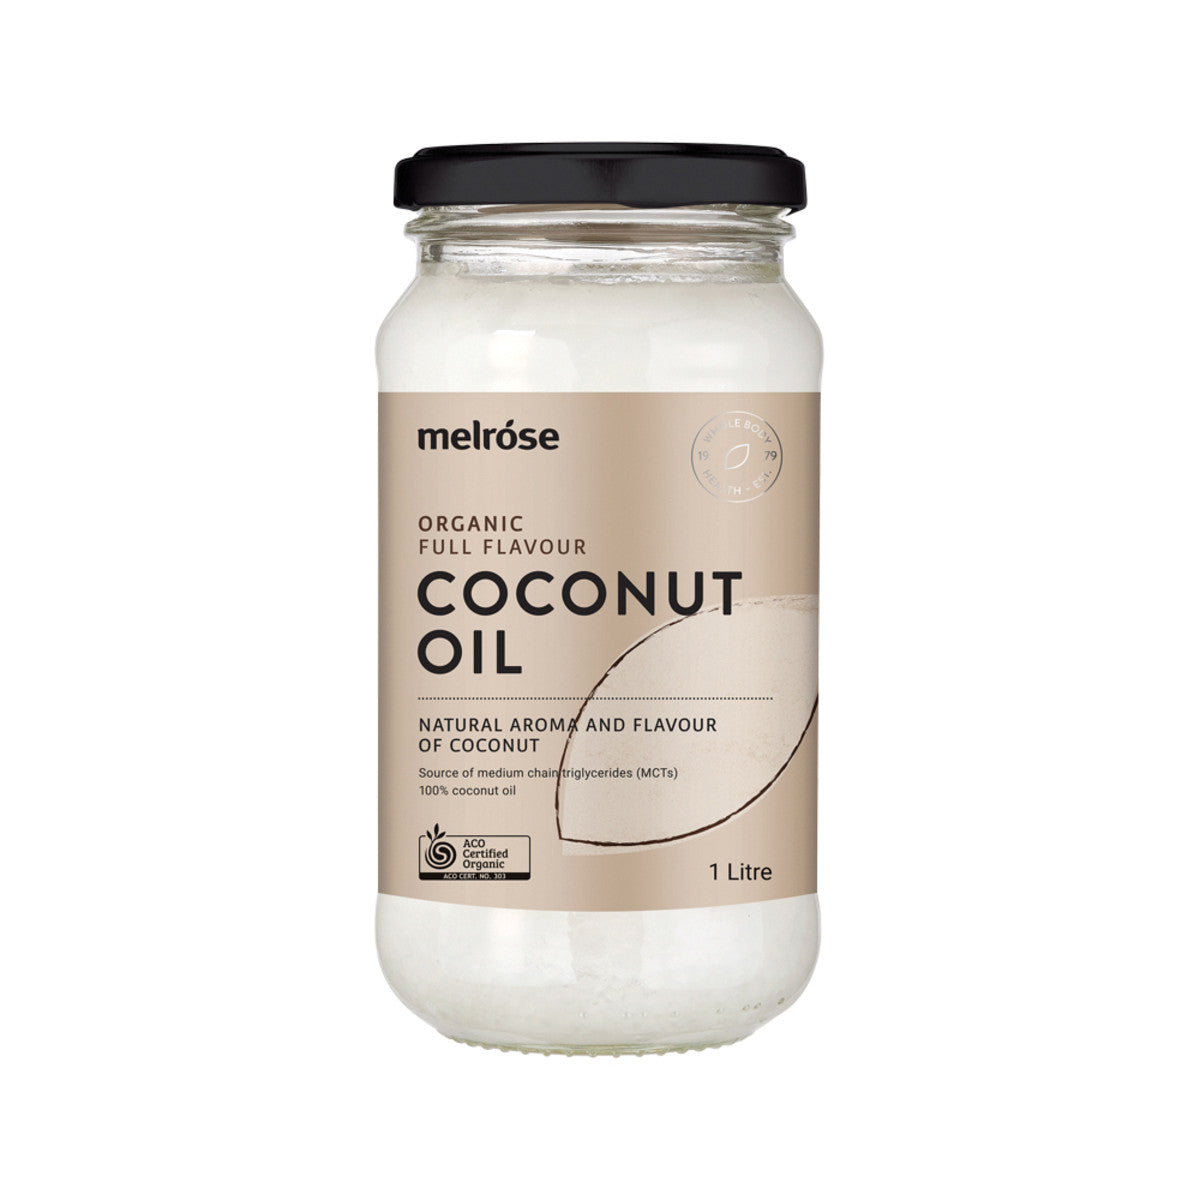 Melrose Organic Full Flavour Coconut Oil 1L-The Living Co.